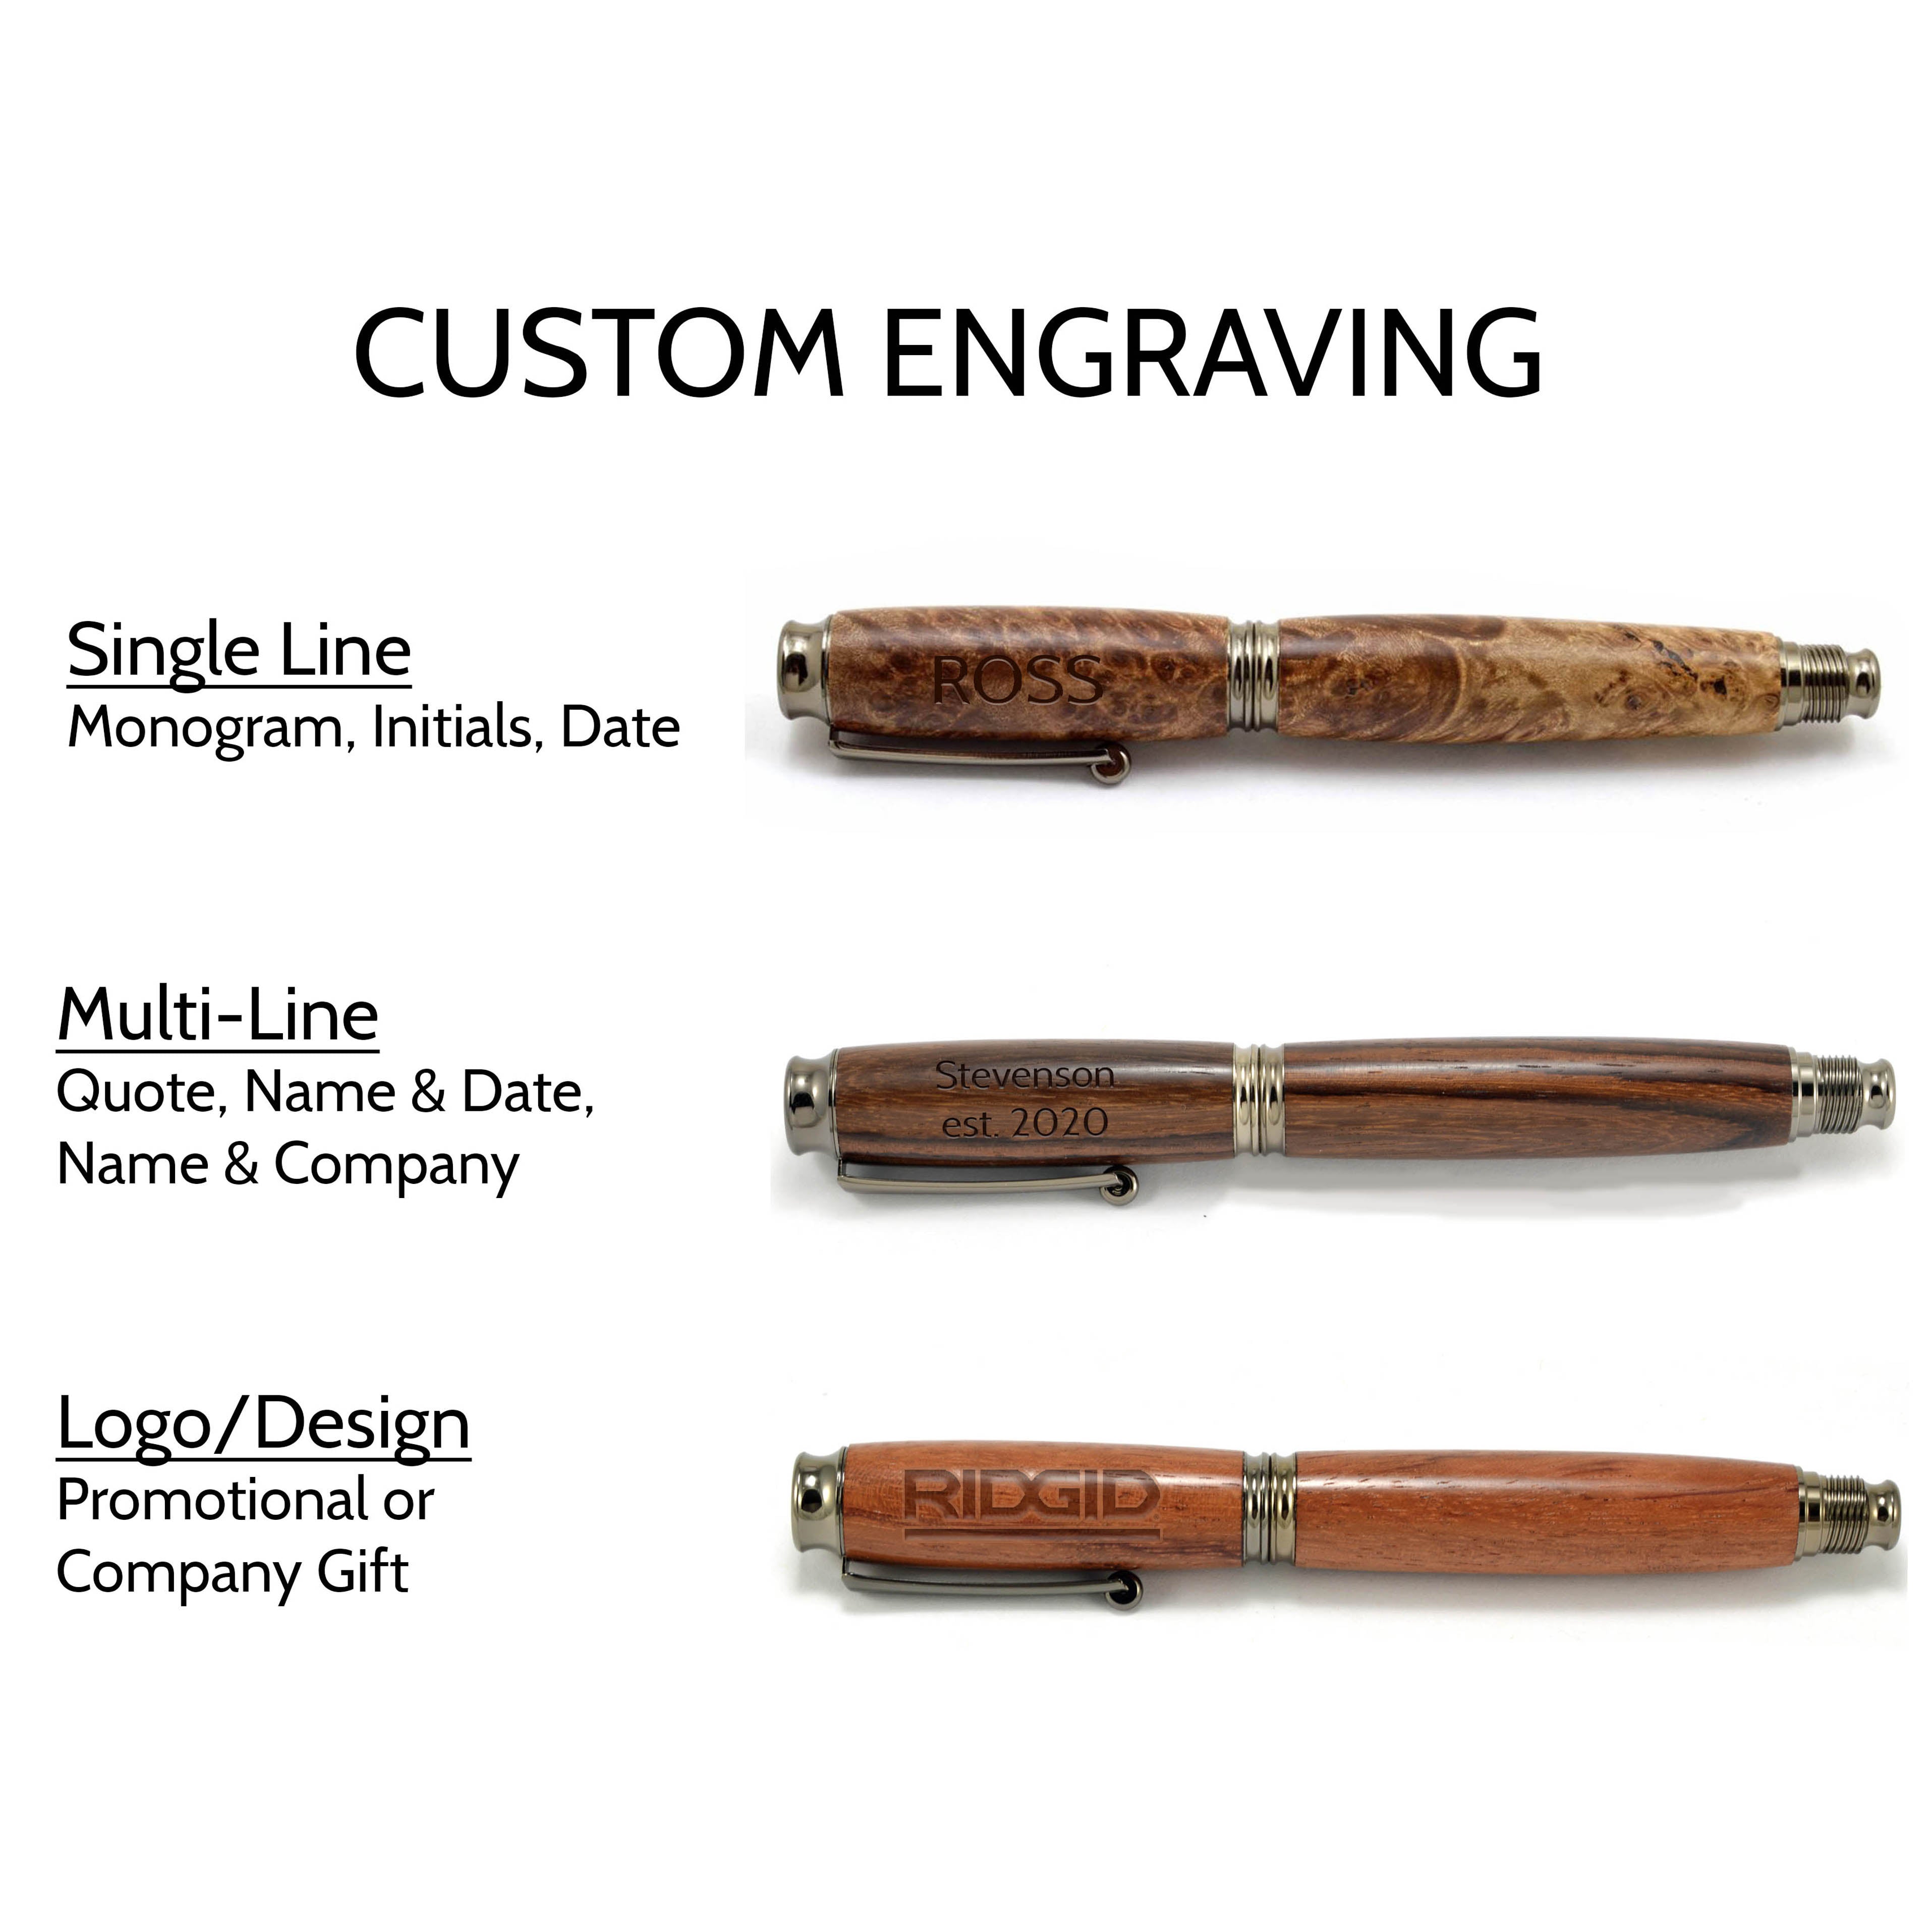 The personalized pen: an exceptional luxury item